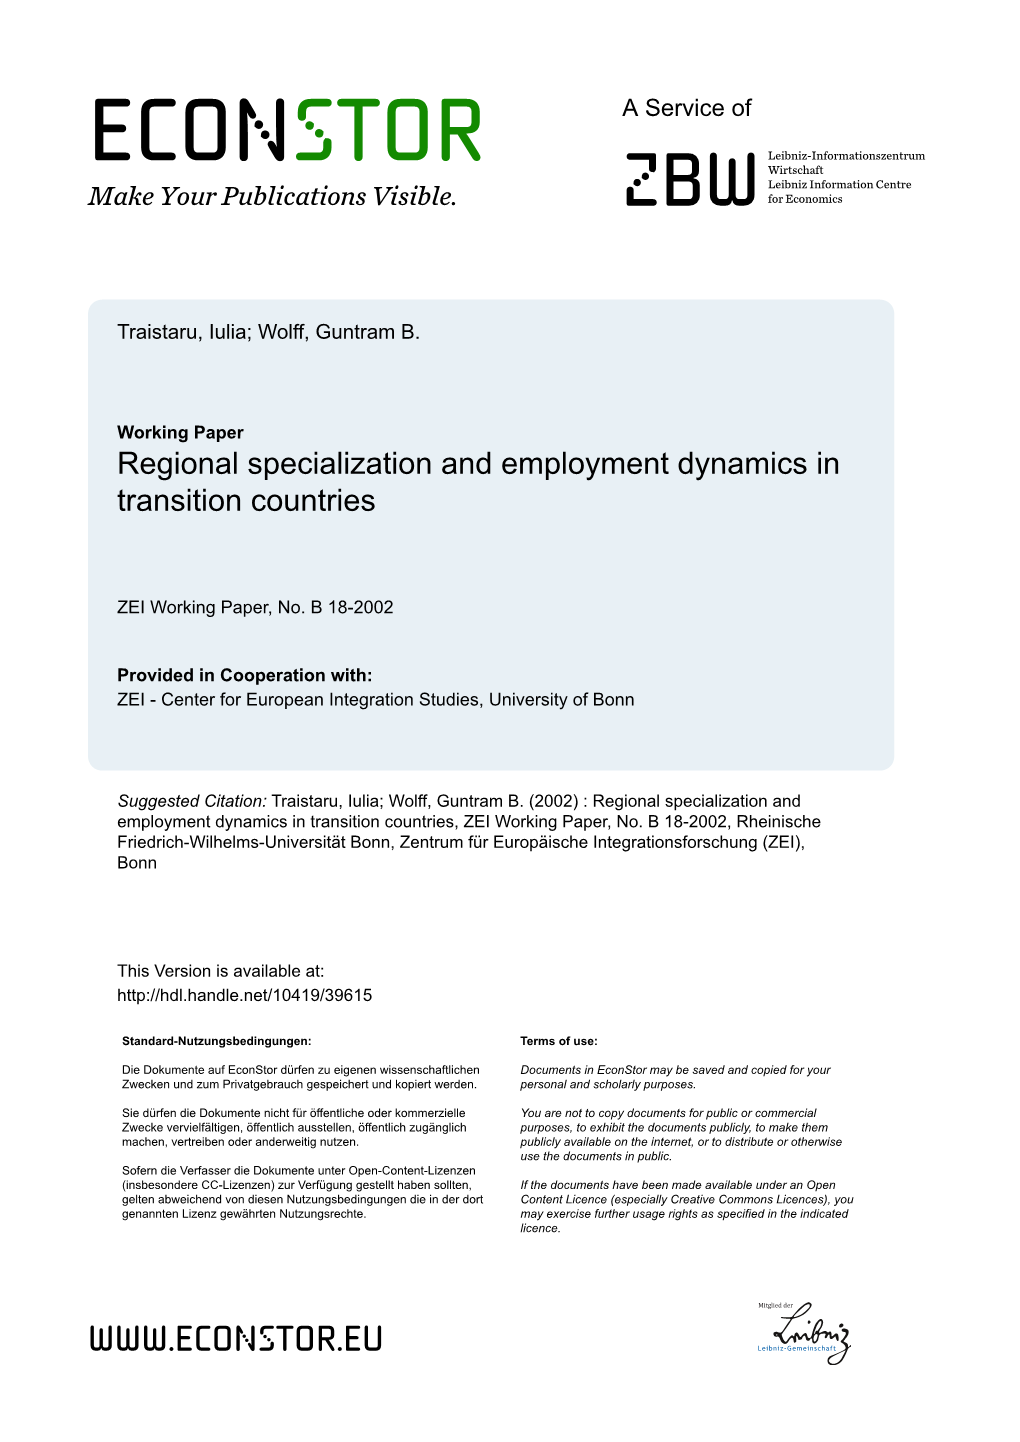 Regional Specialization and Employment Dynamics in Transition Countries